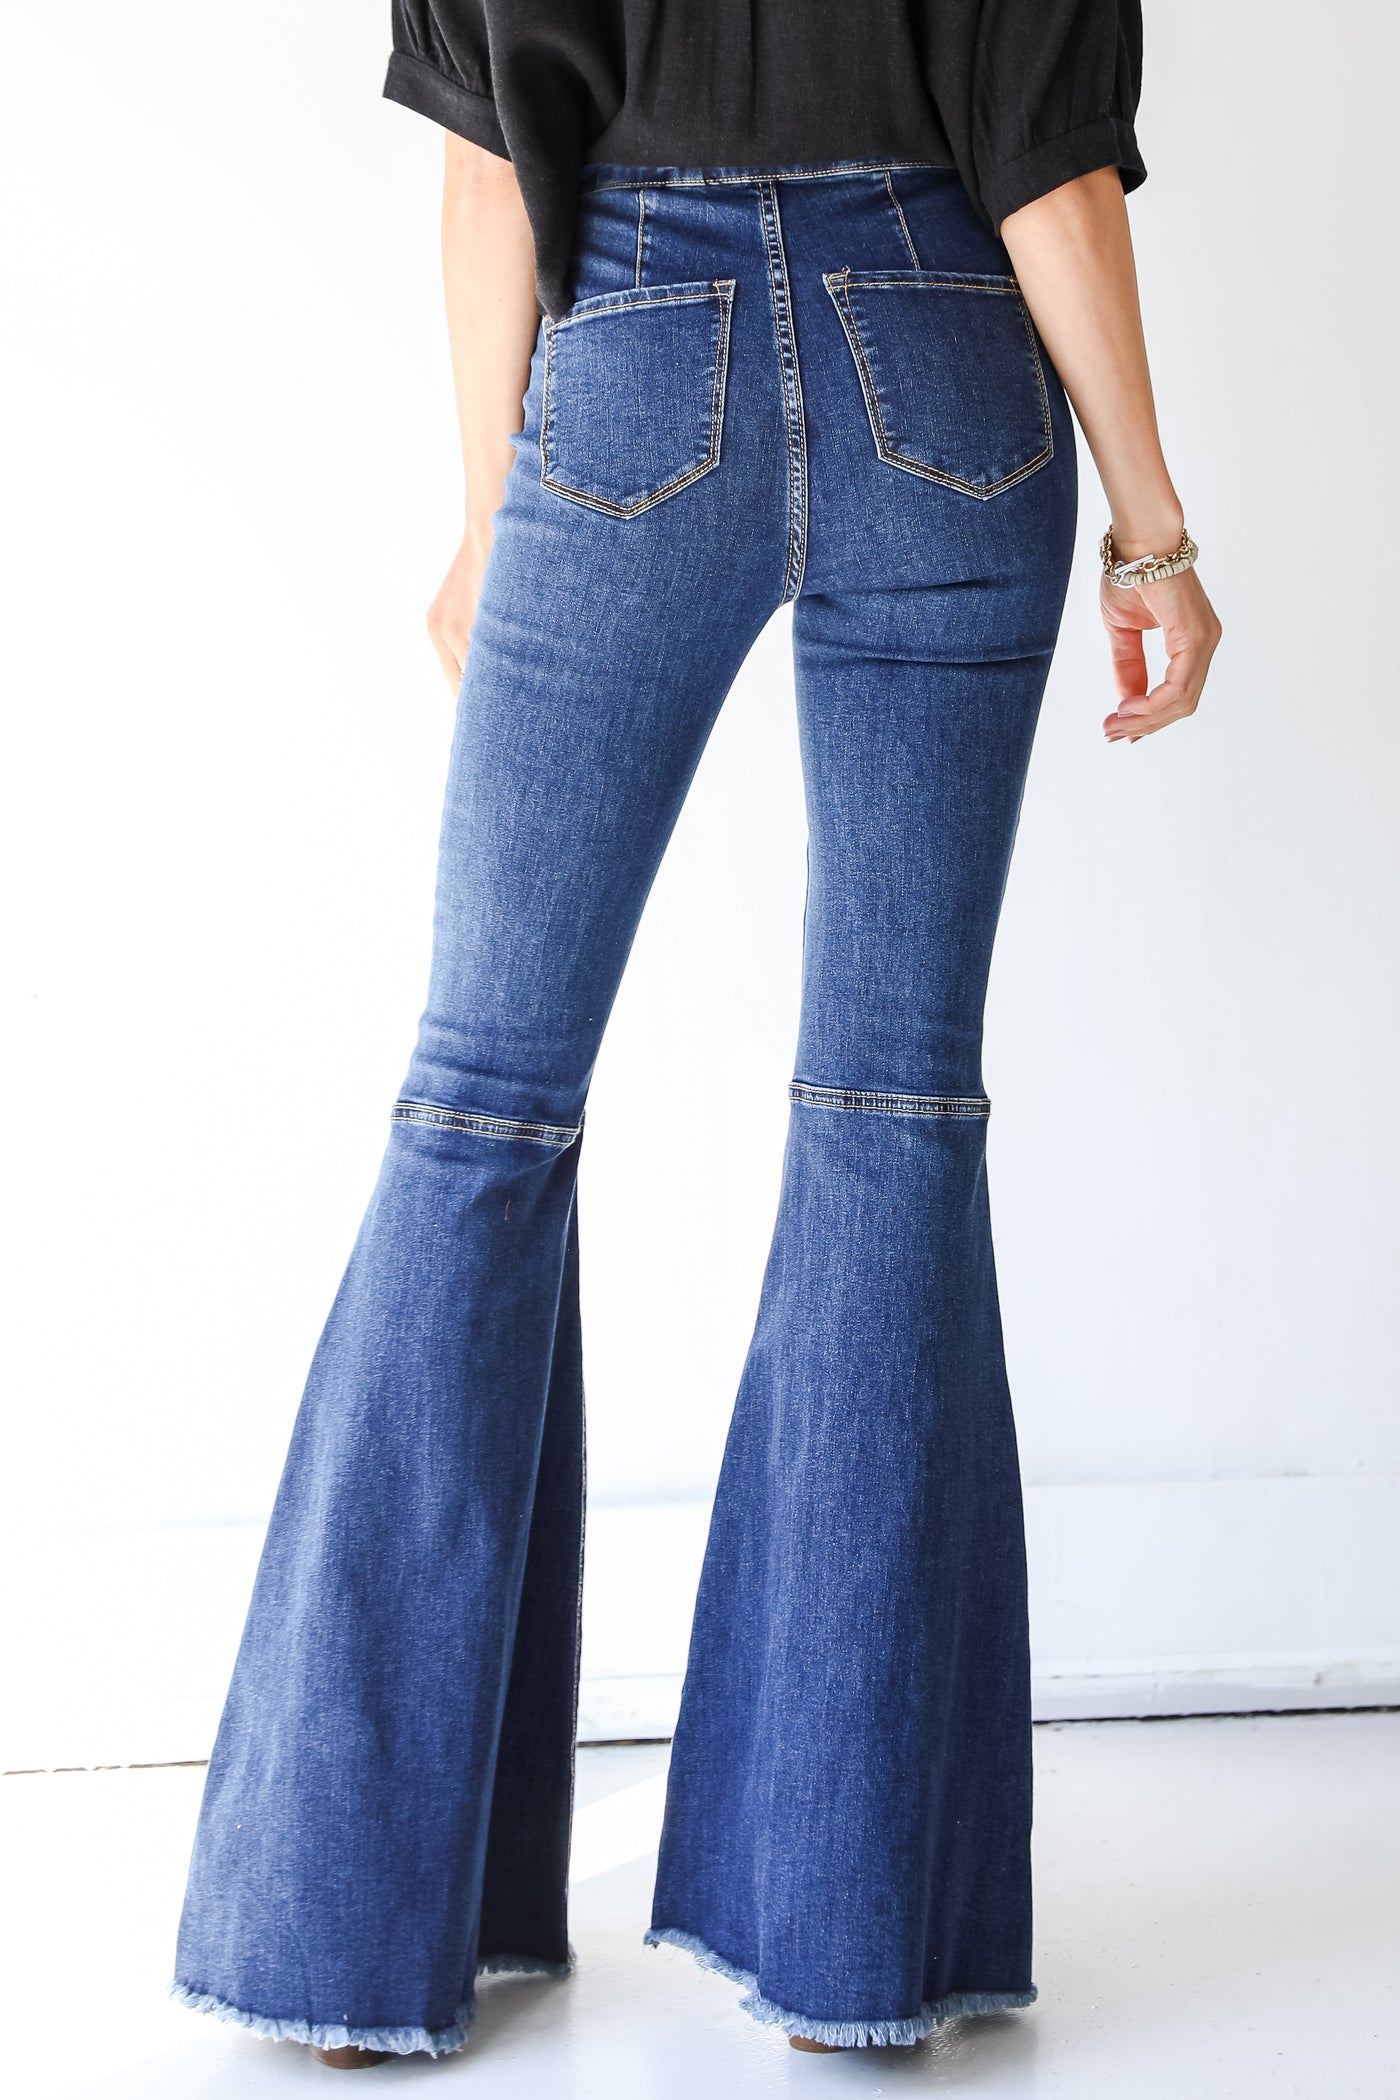 flare jeans back view